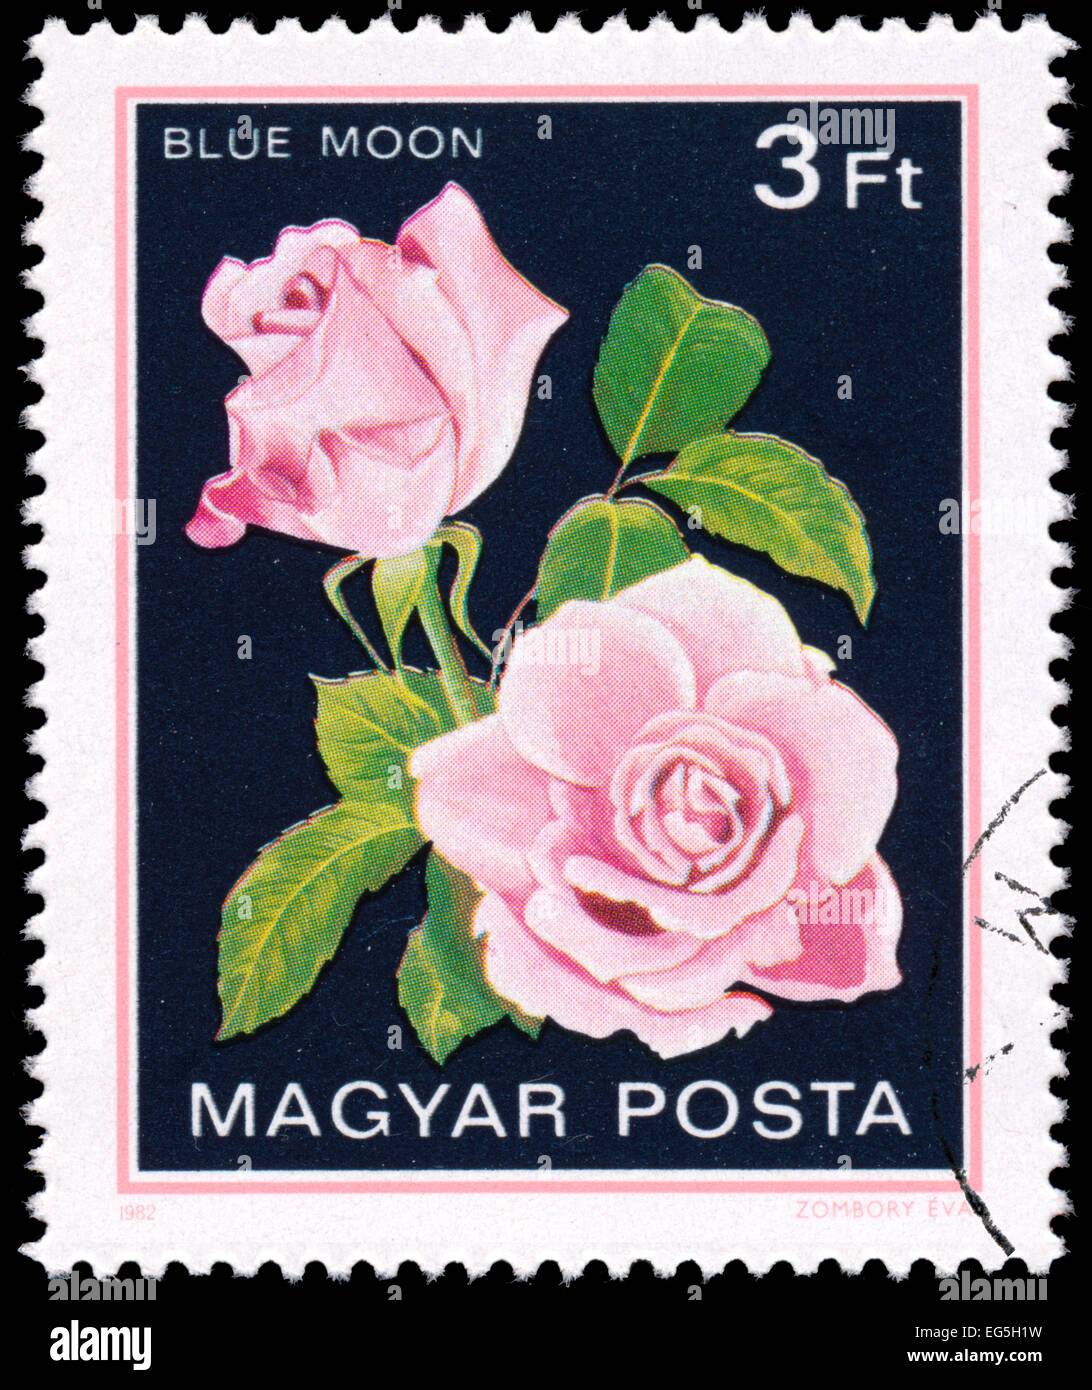 HUNGARY - CIRCA 1982: A stamp printed in Hungary shows Blue Moon, Rose Flower, circa 1982 Stock Photo